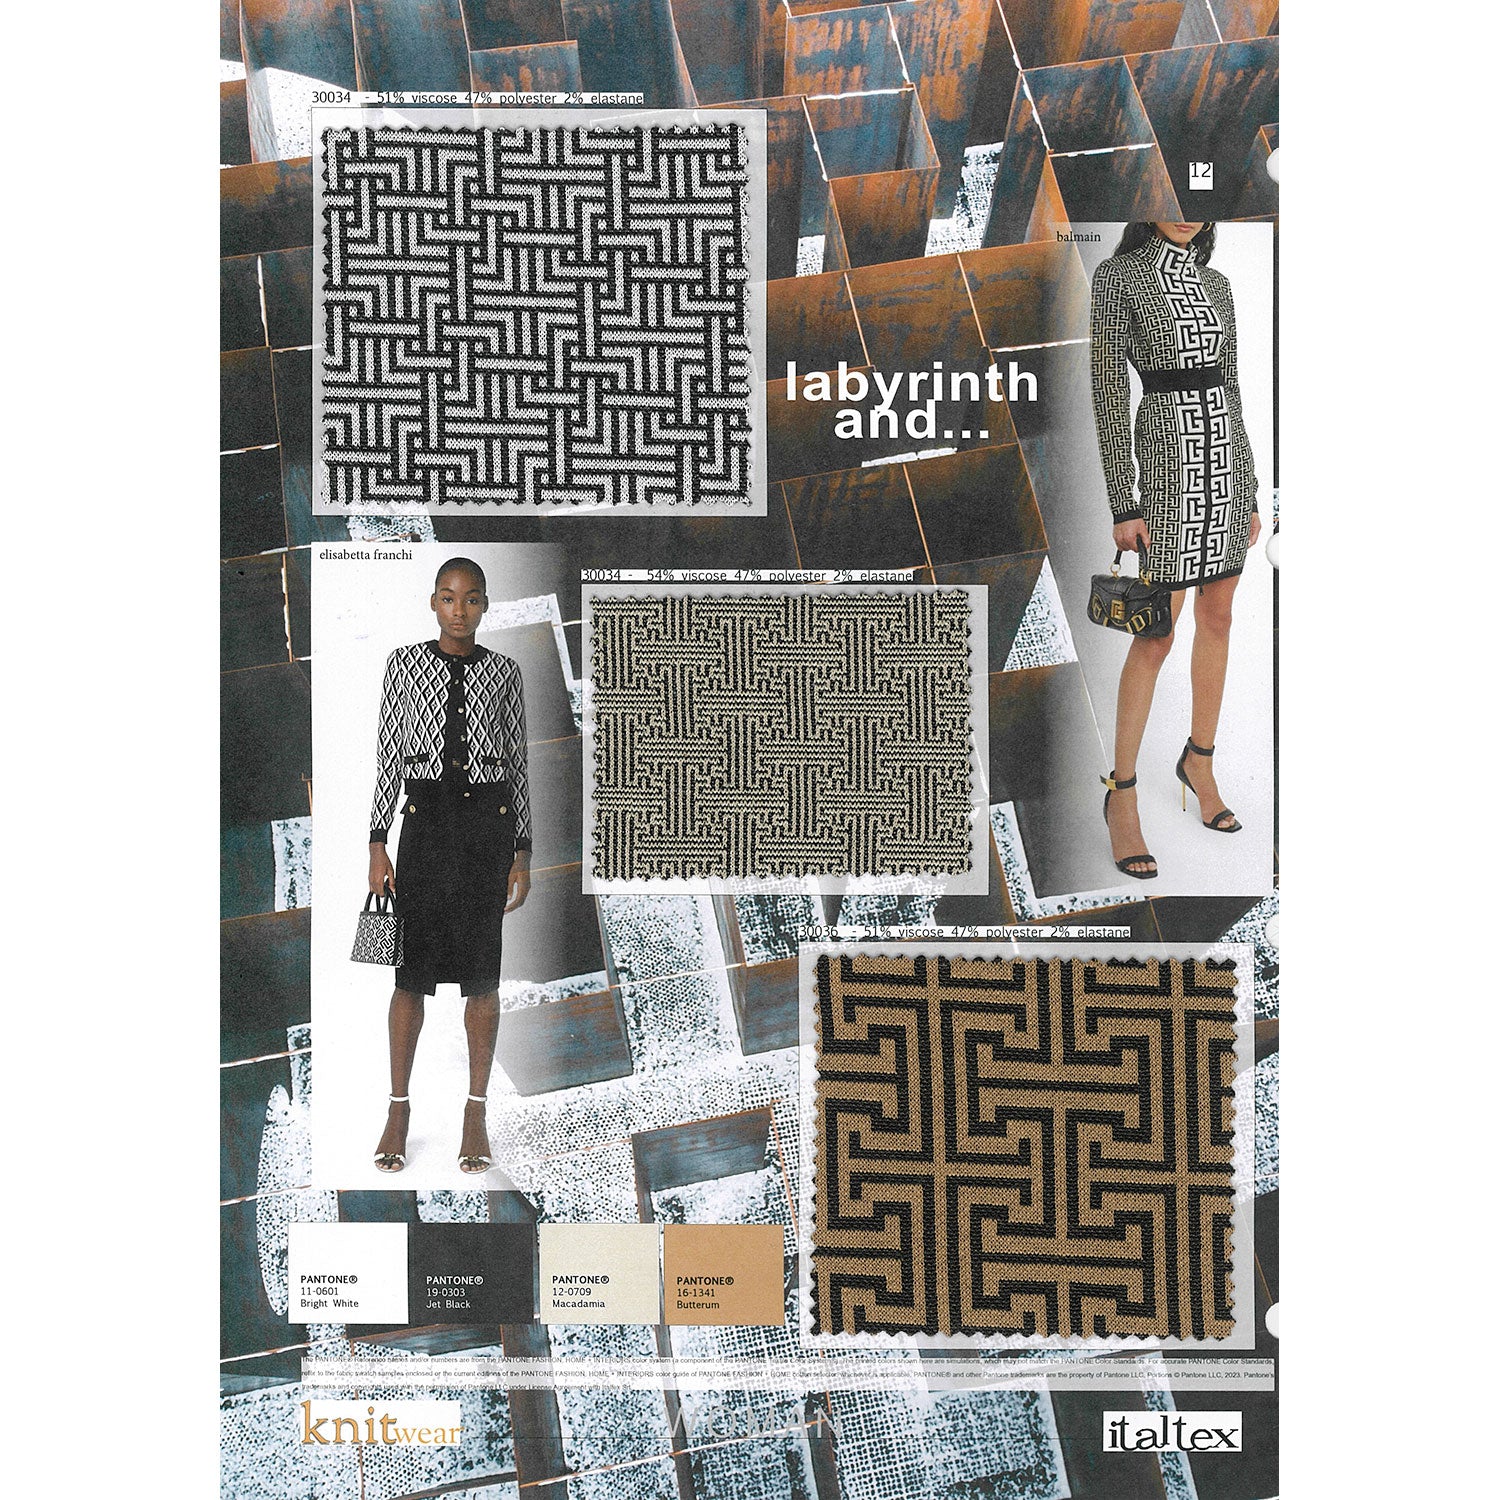 Three fabric swatches of jacquard knits for women's wear in geometric labyrinth patterns. One is a medium repeat black and white pattern. One is a tiny repeat black and beige pattern. One is a wide repeat black and brown pattern. They are suitable for jackets, cardigans, dresses and sweaters